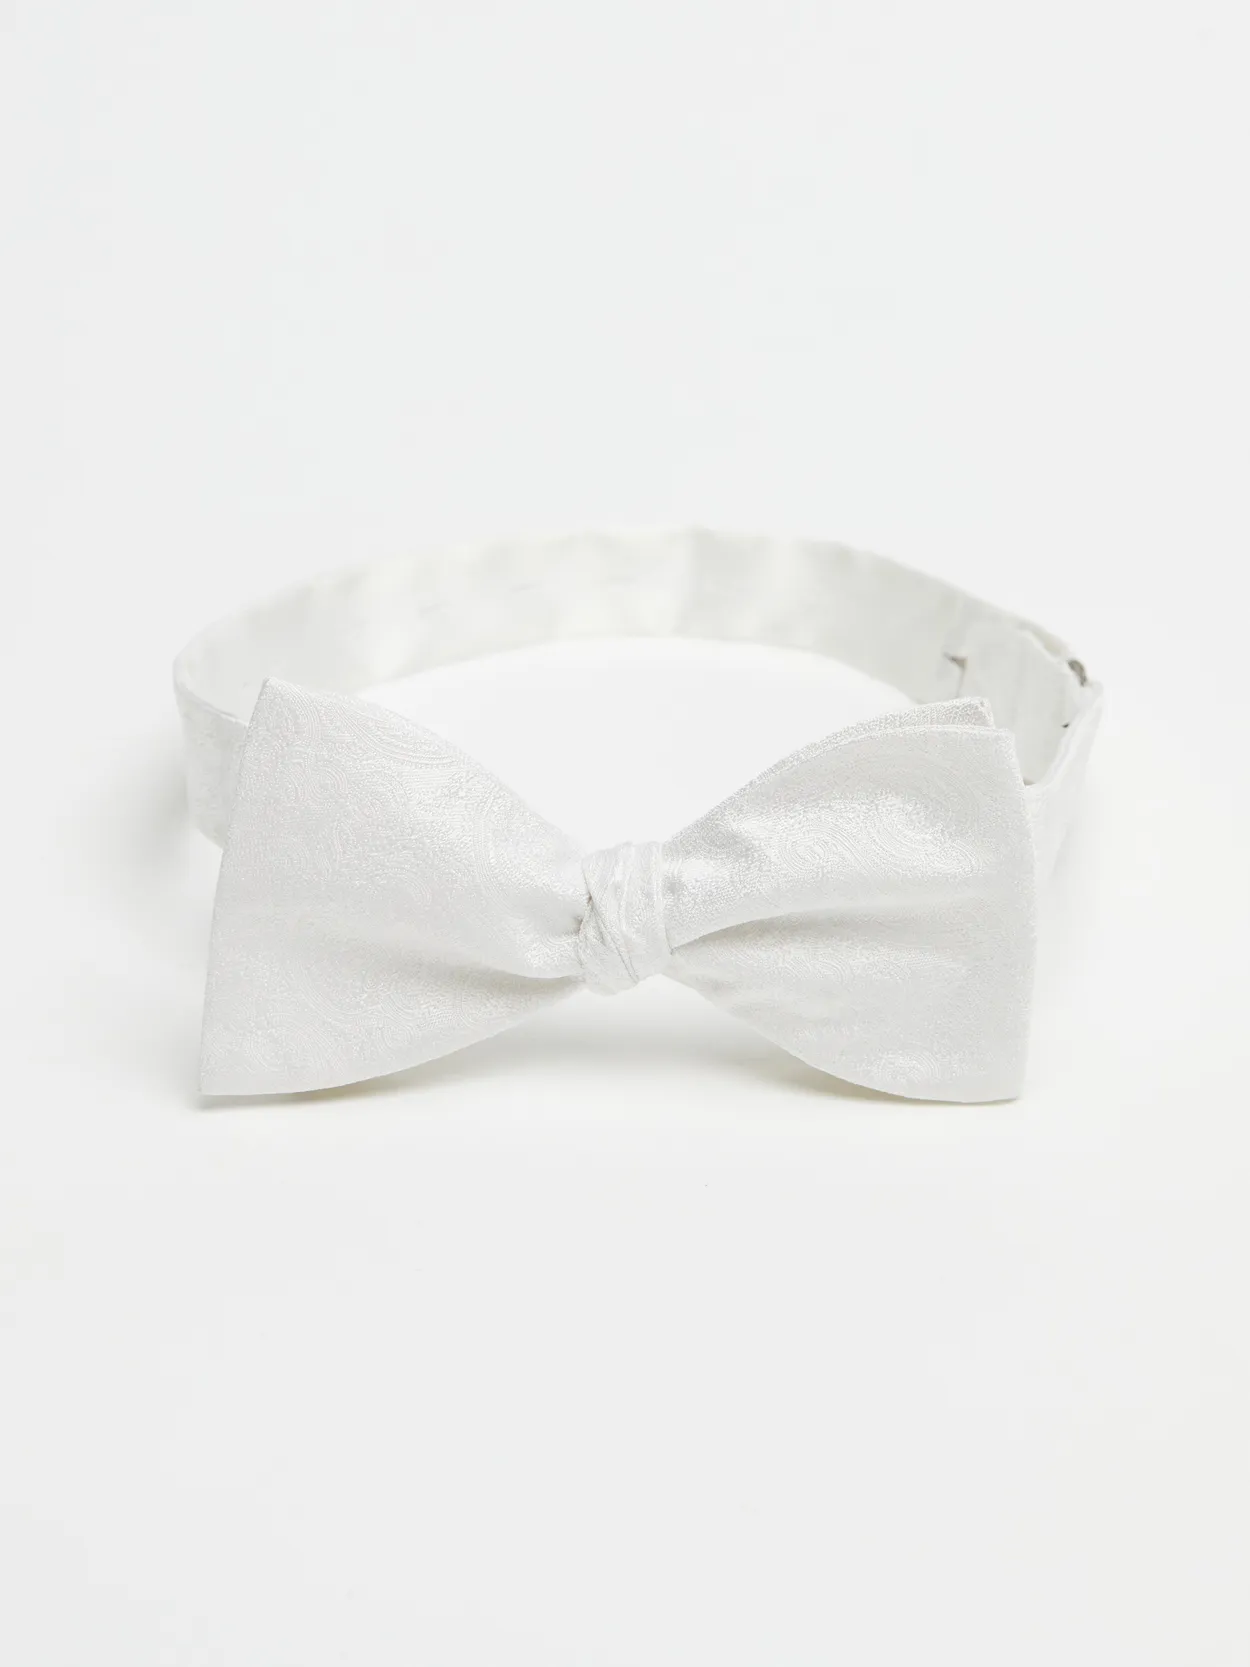 White Bow Tie Formal 